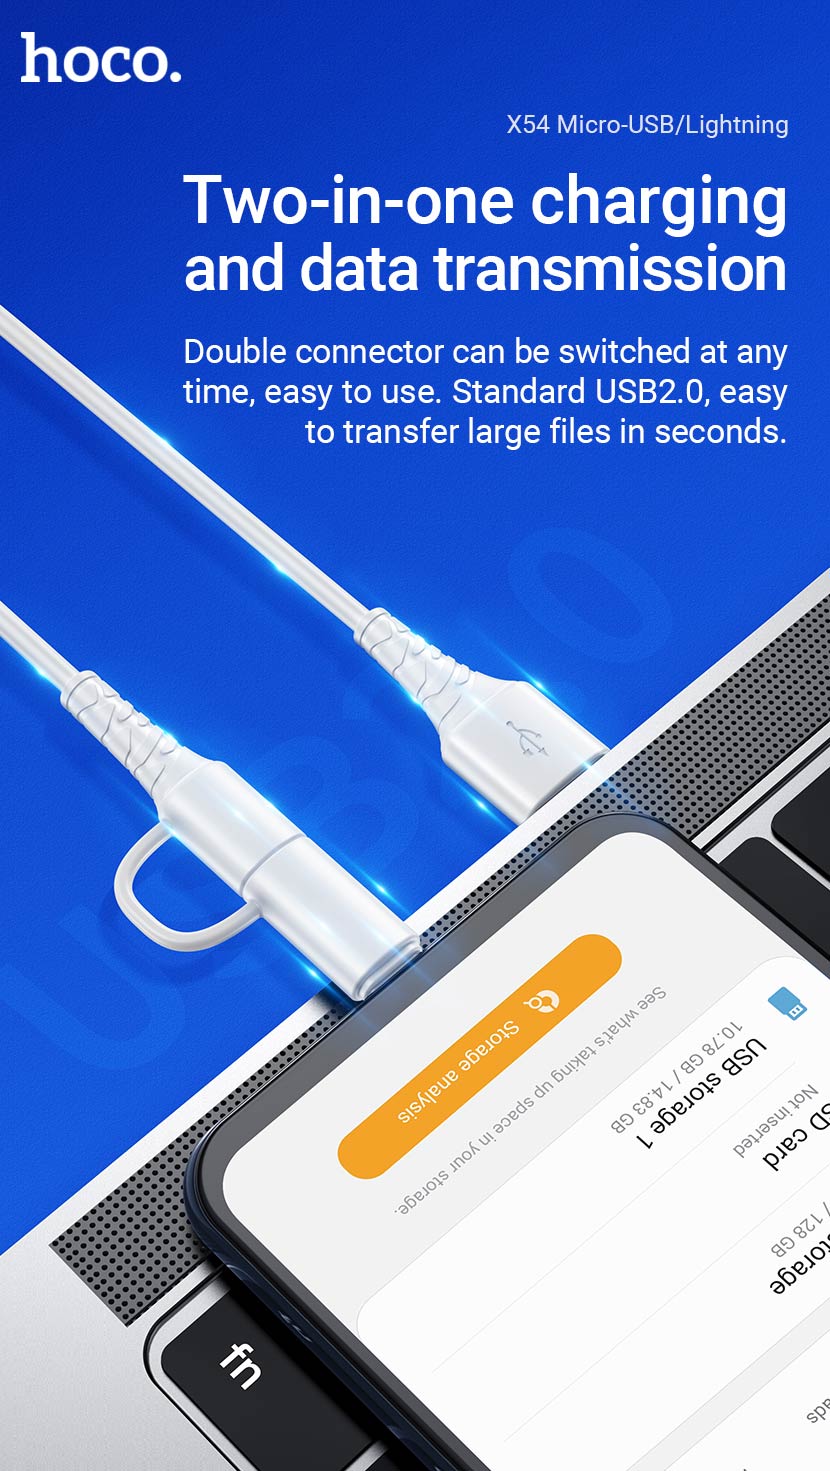 hoco news x54 cool dual 2in1 charging data cable transmission en